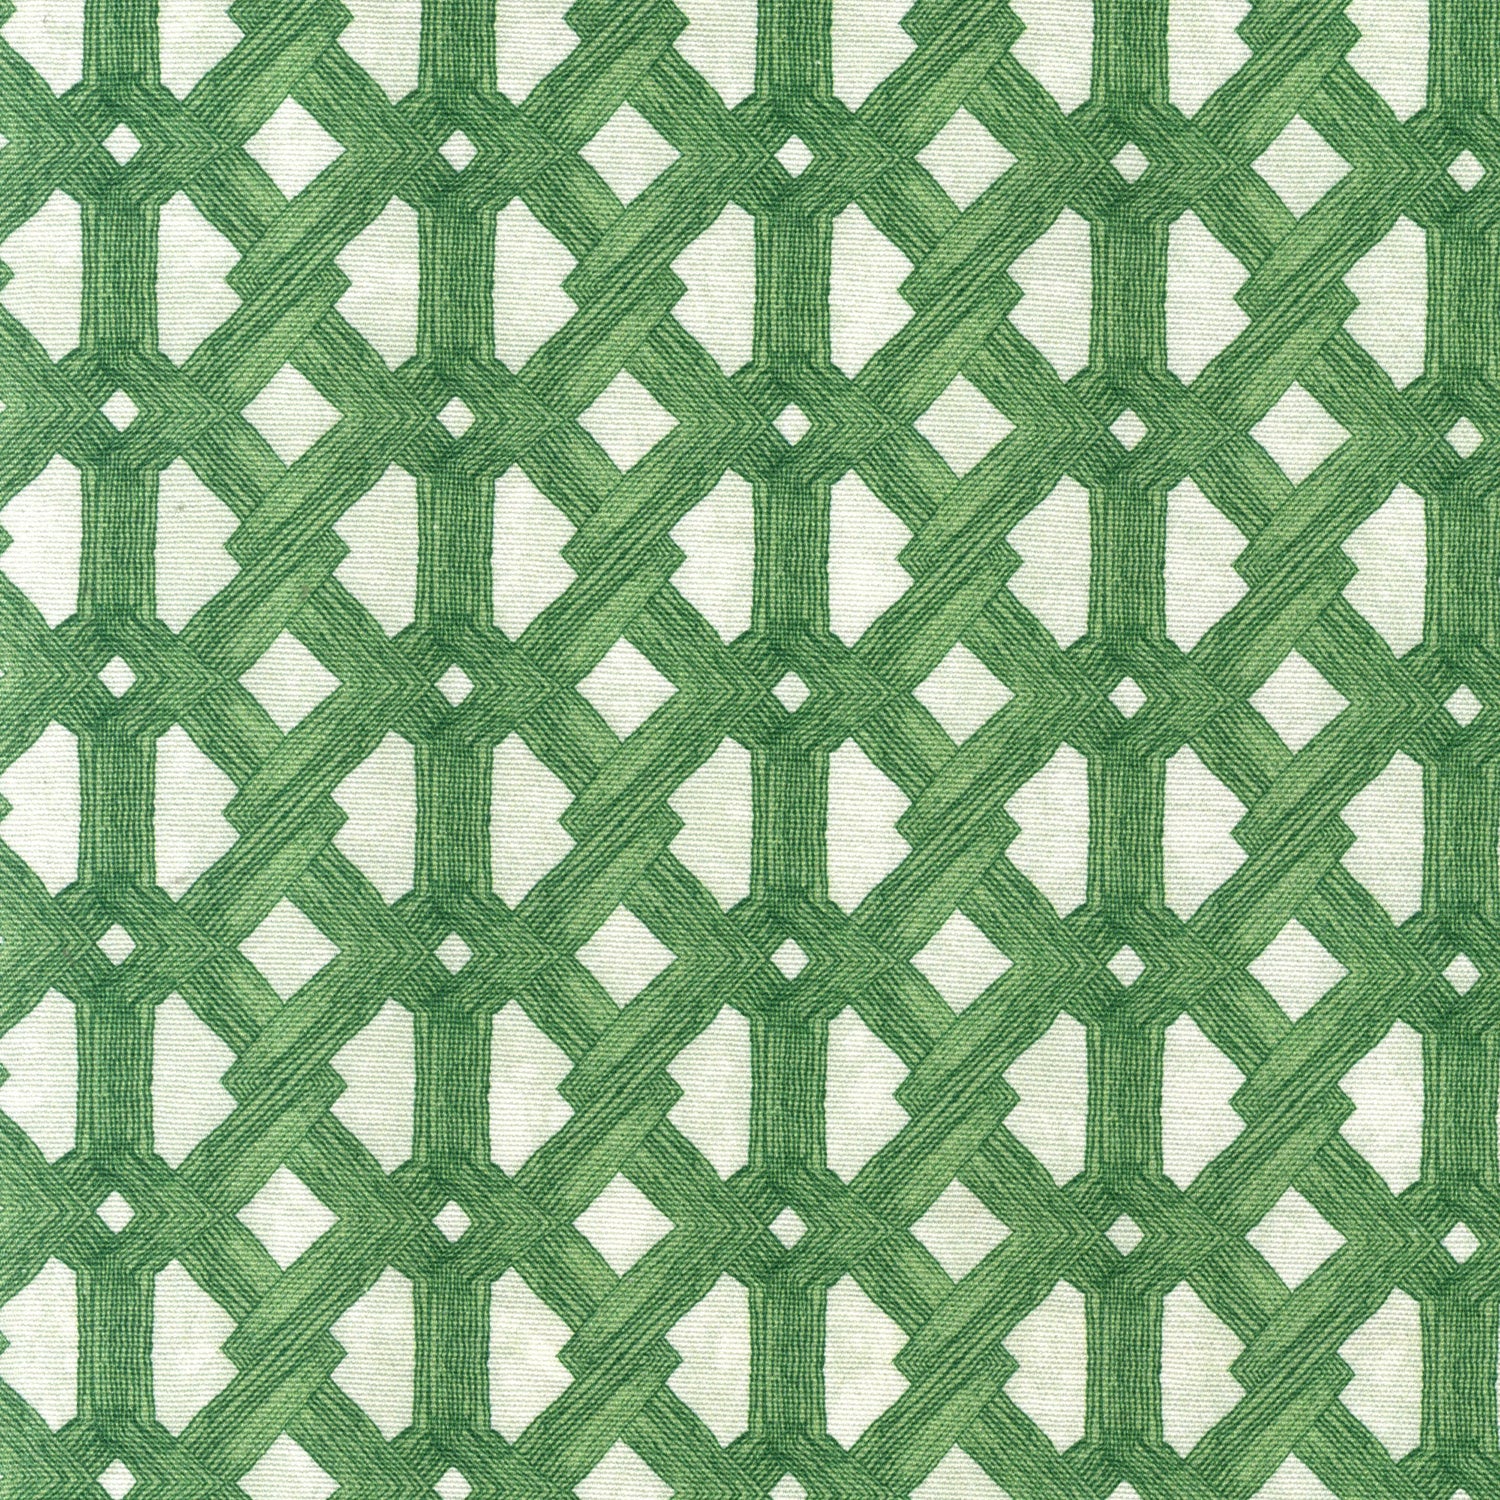 Detail of fabric in an intricate lattice print in green on a light green field.